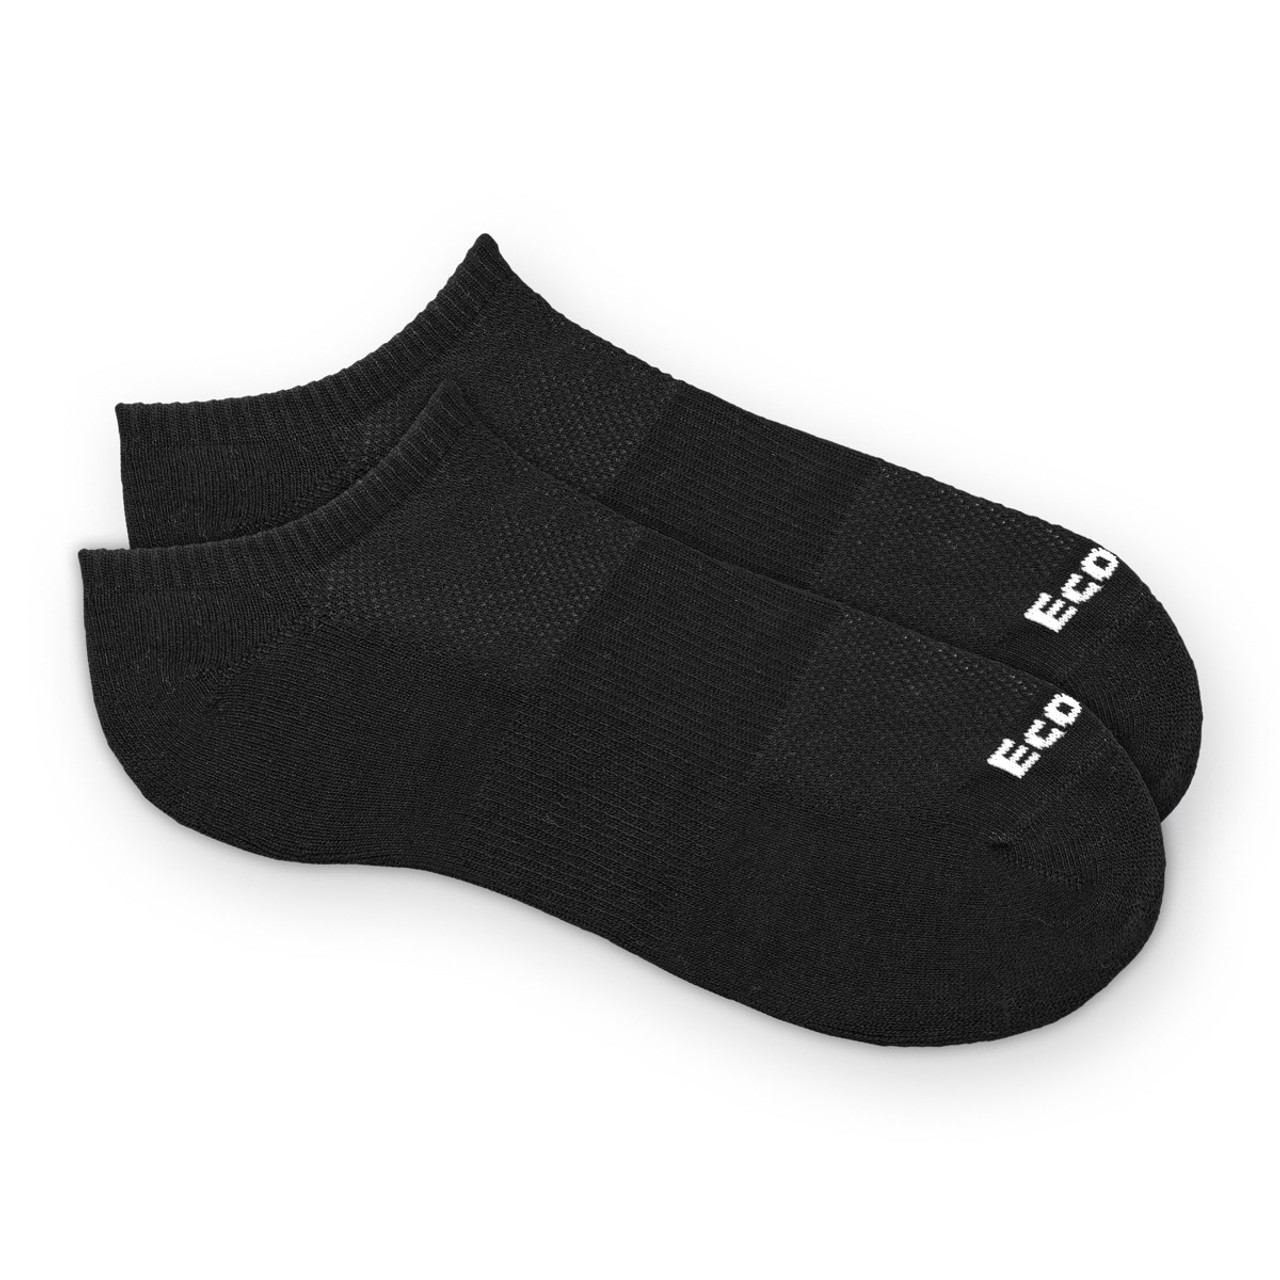 Bamboo No-Show Socks with Optimal Fit and Performance - EcoSox